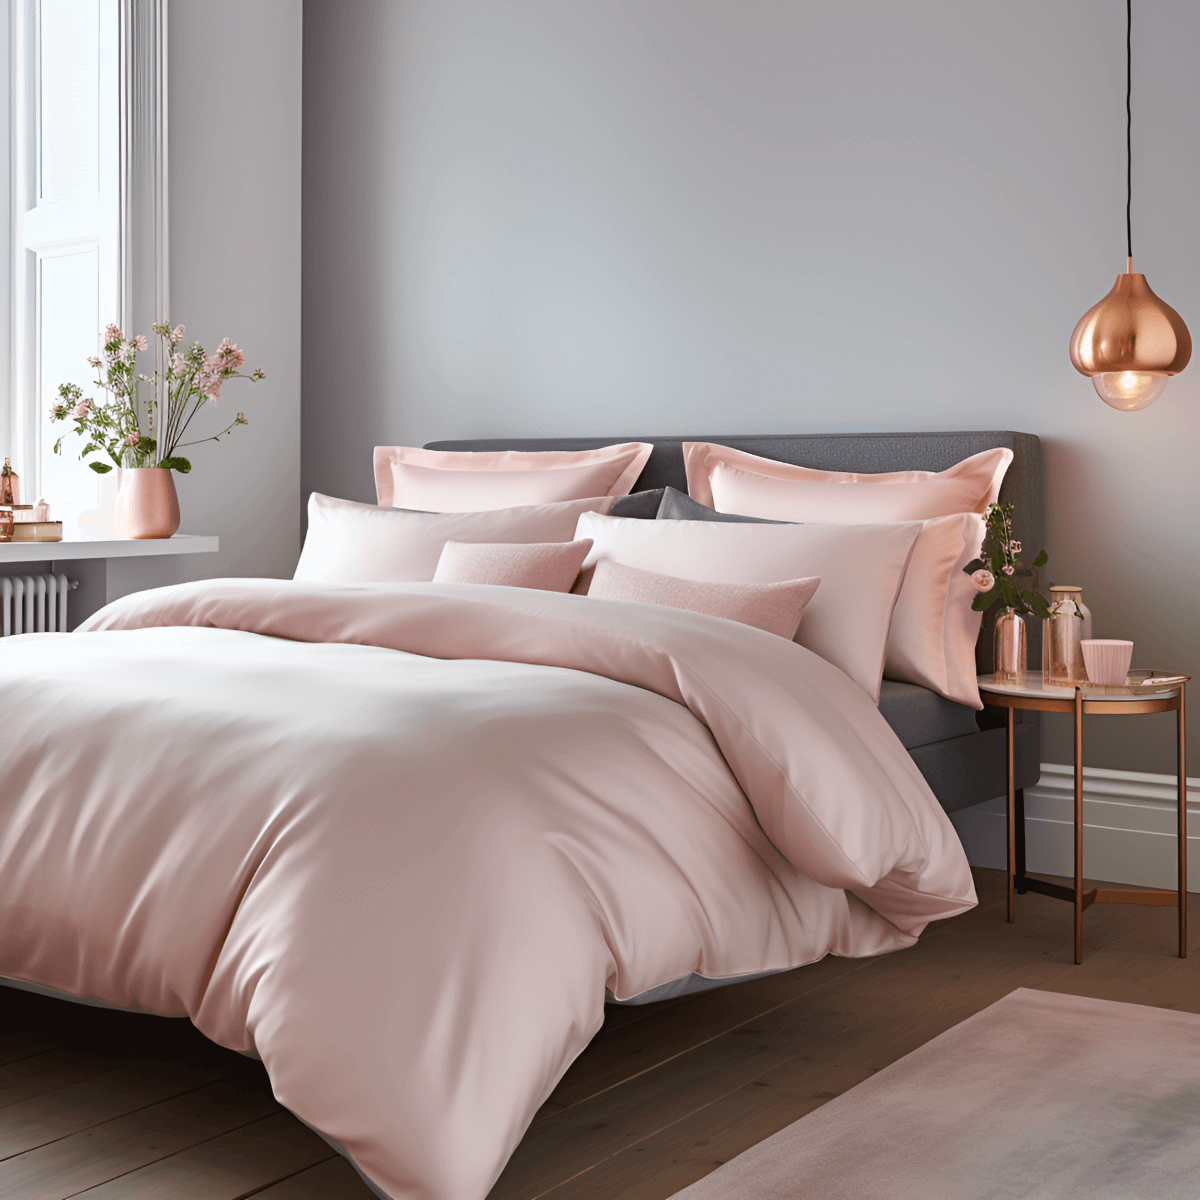 Egyptian Cotton 500 Thread Count Sateen Luxury Duvet Cover and Two Standard Pillowcases, Pink - Hampton & Astley